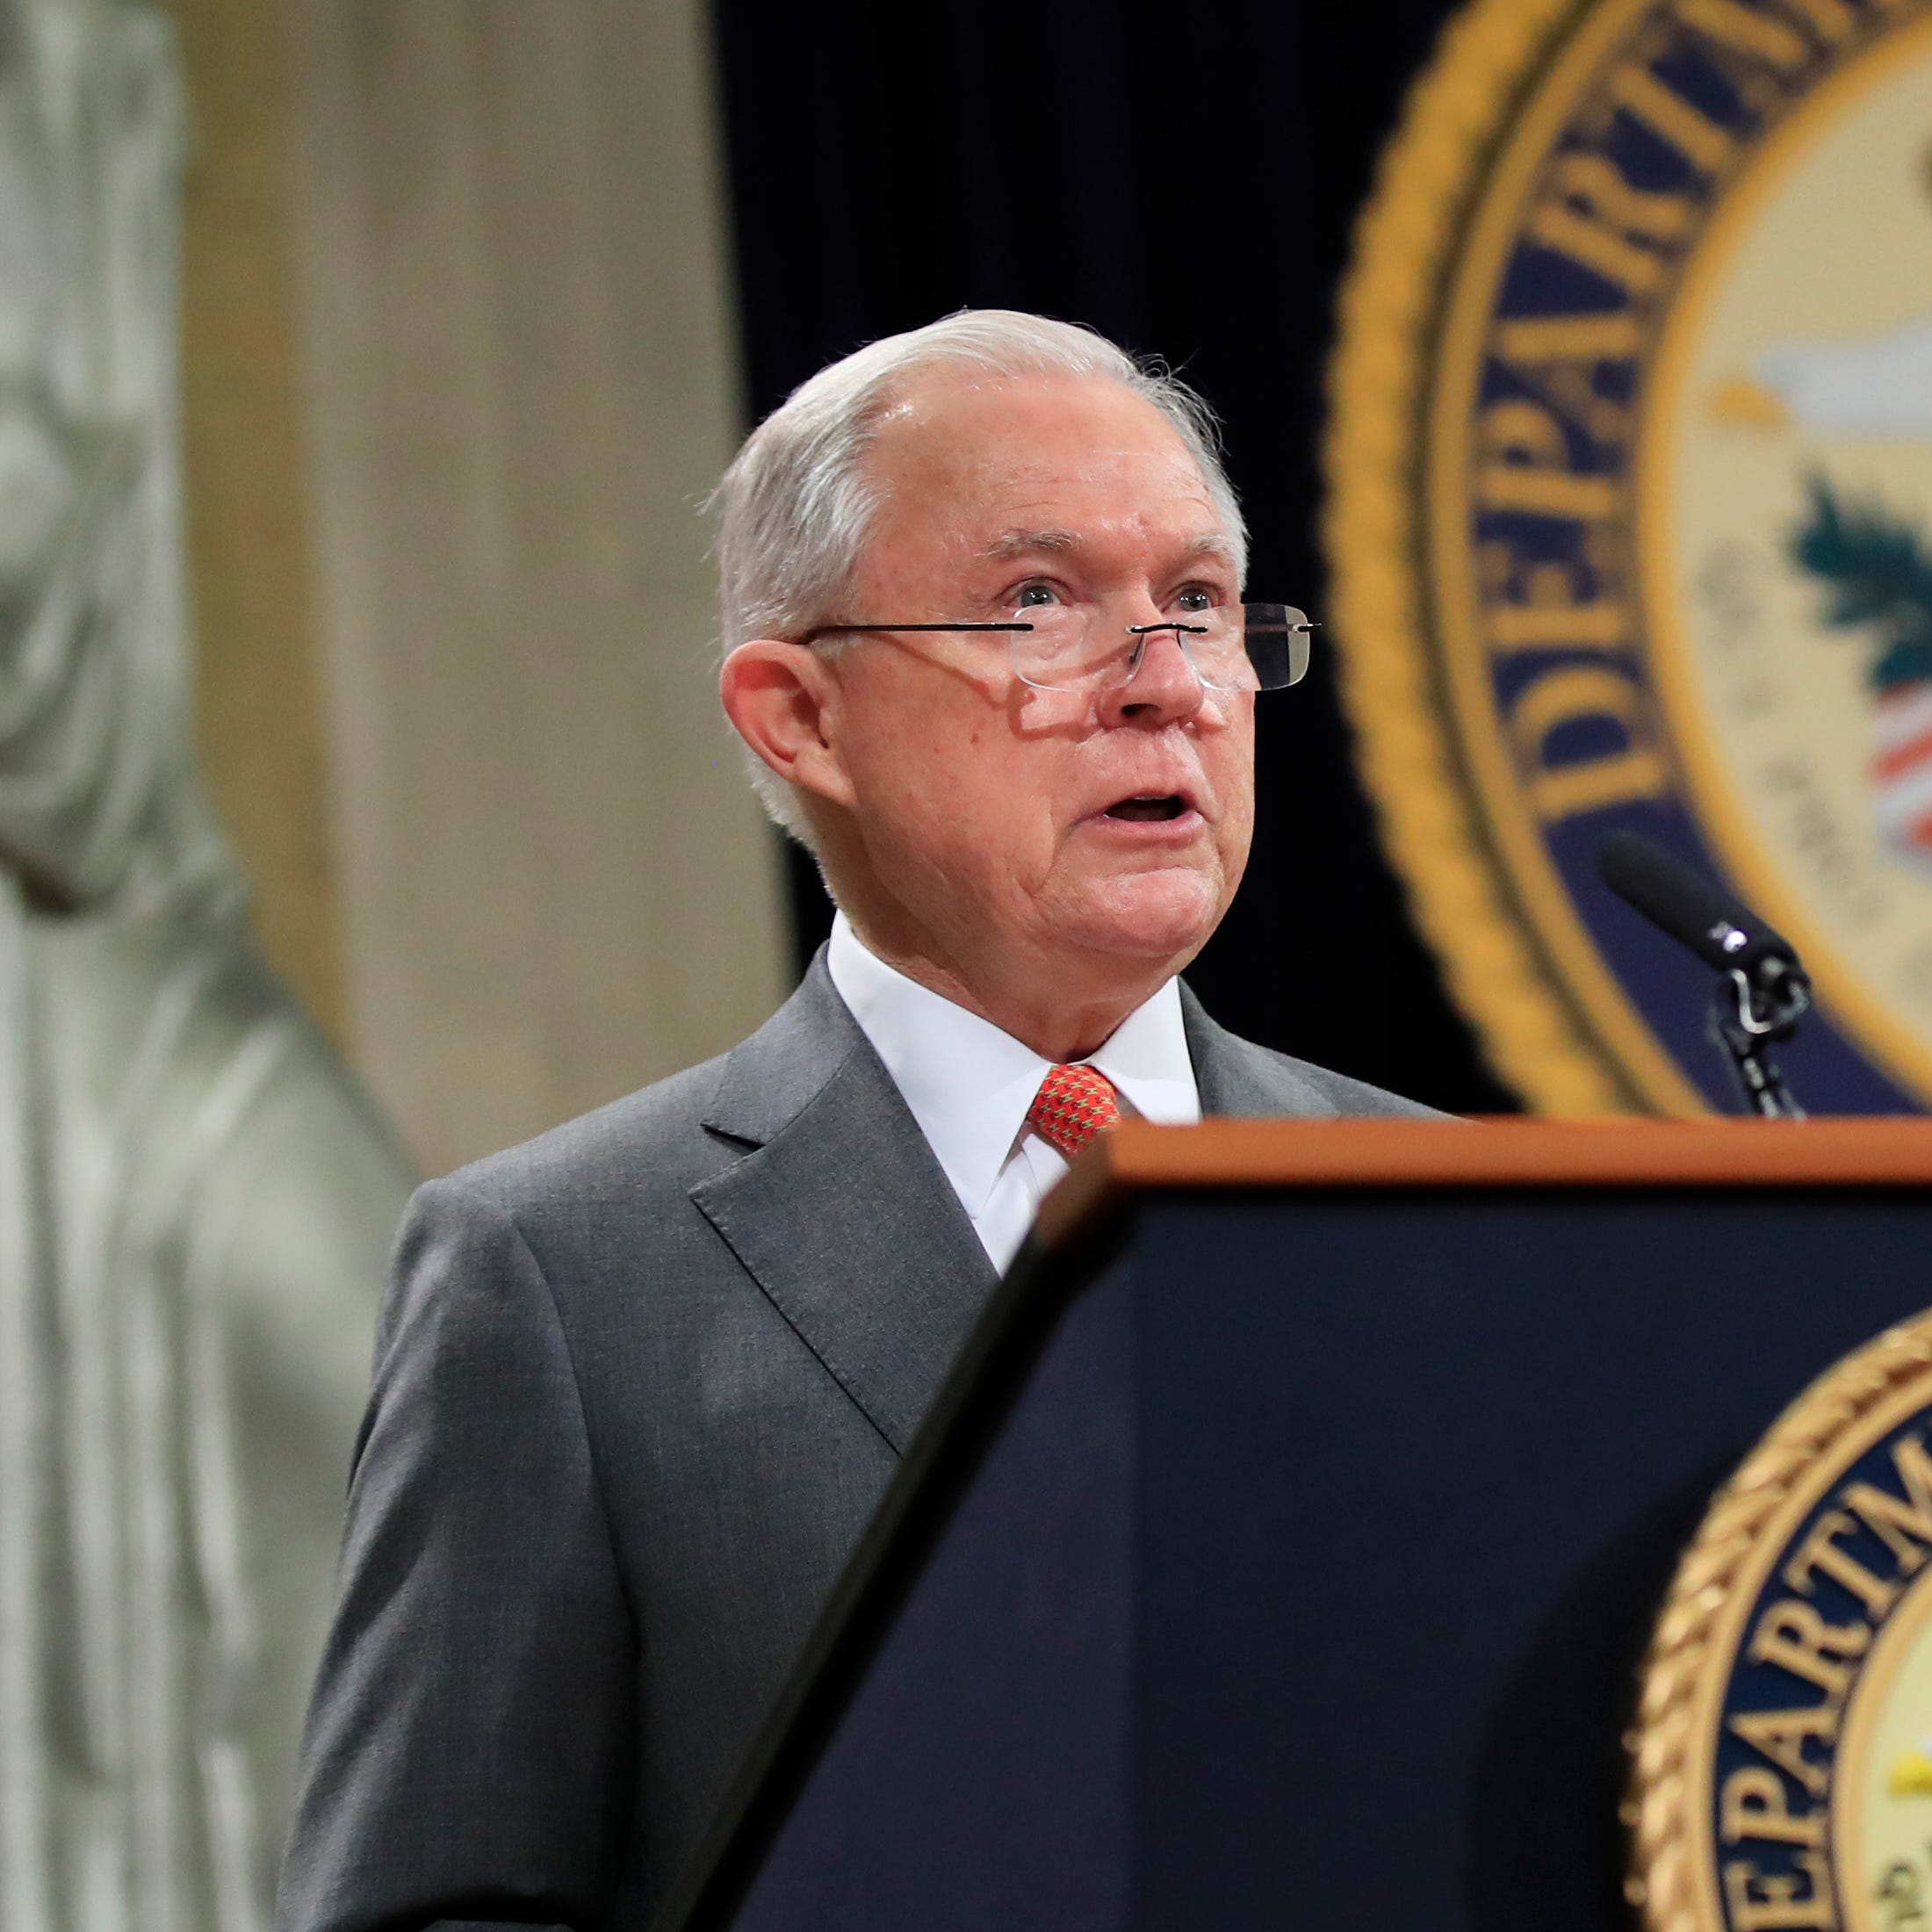 Attorney General Jeff Sessions speaks during a Religious Liberty Summit at the Department of Justice July 30, 2018.